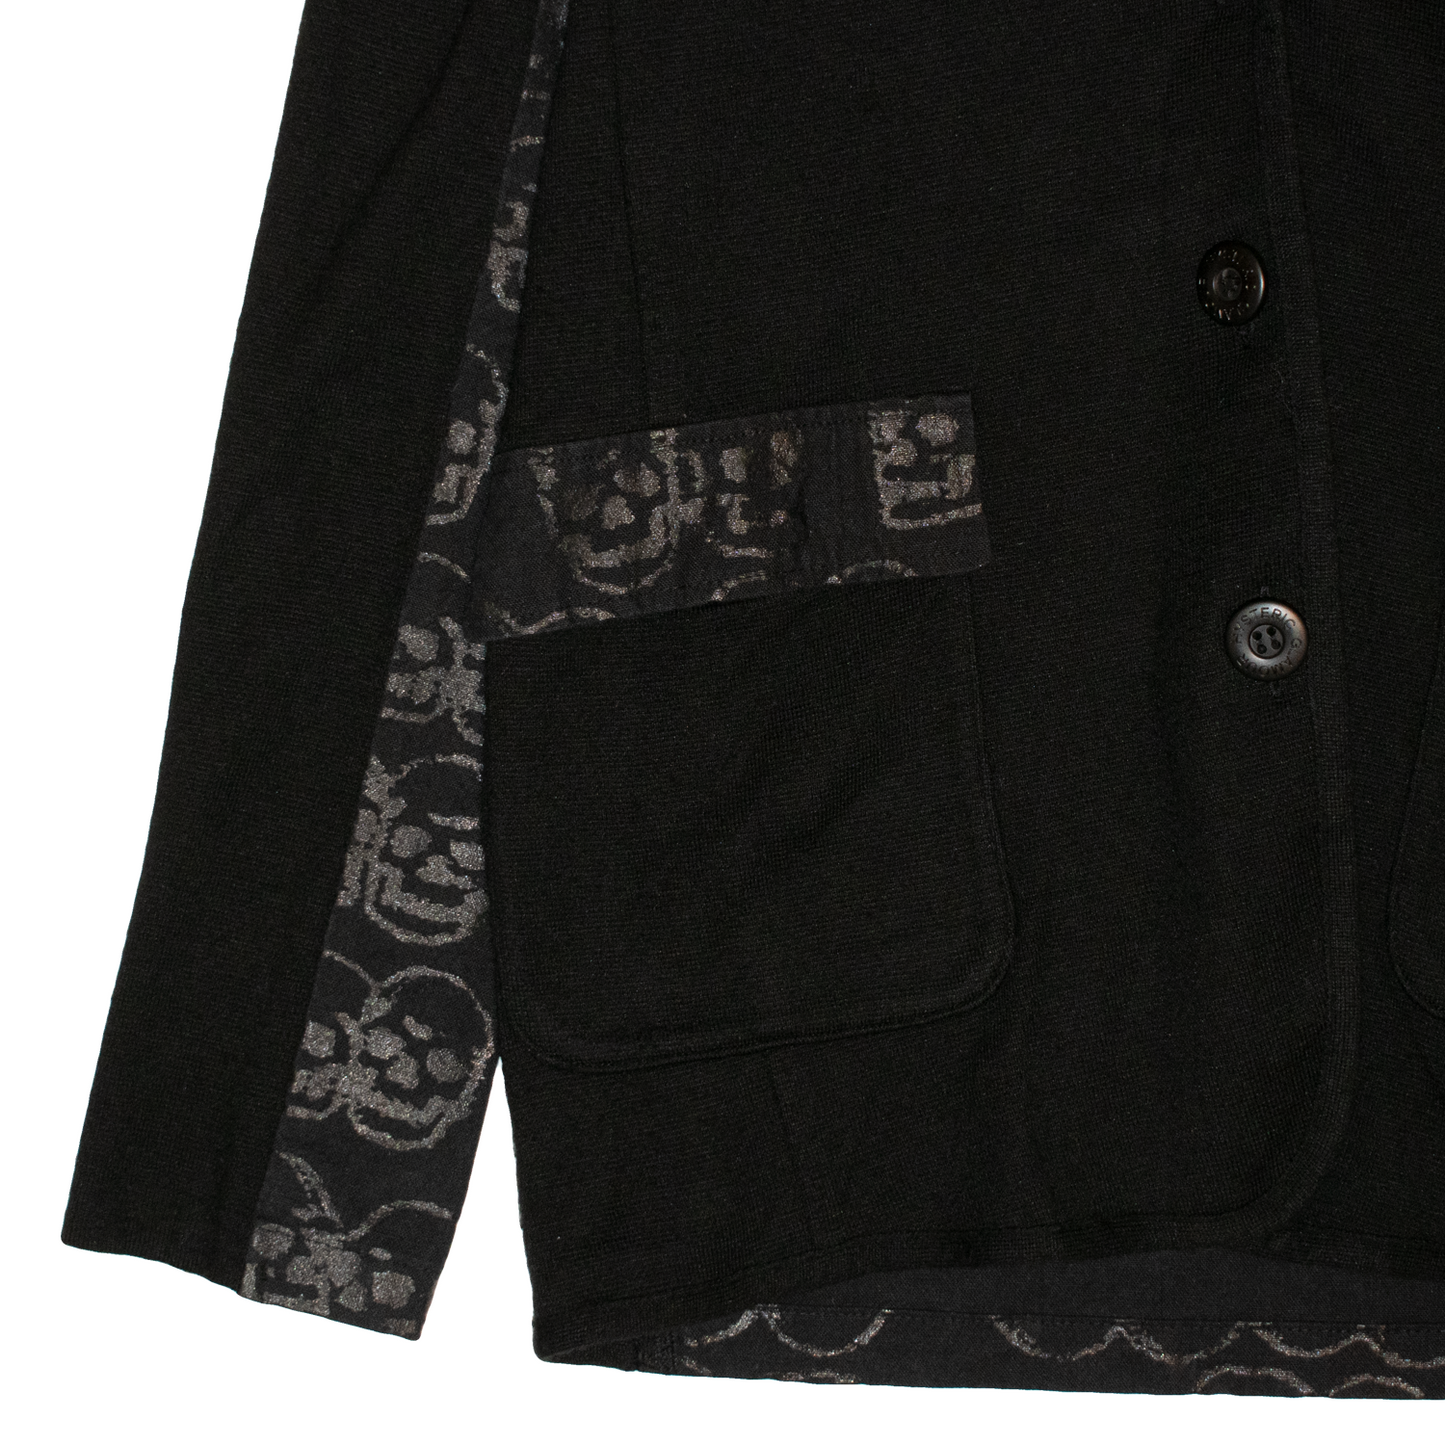 Hysteric Glamour Skulls Hooded Knit Cardigan - 1990’s